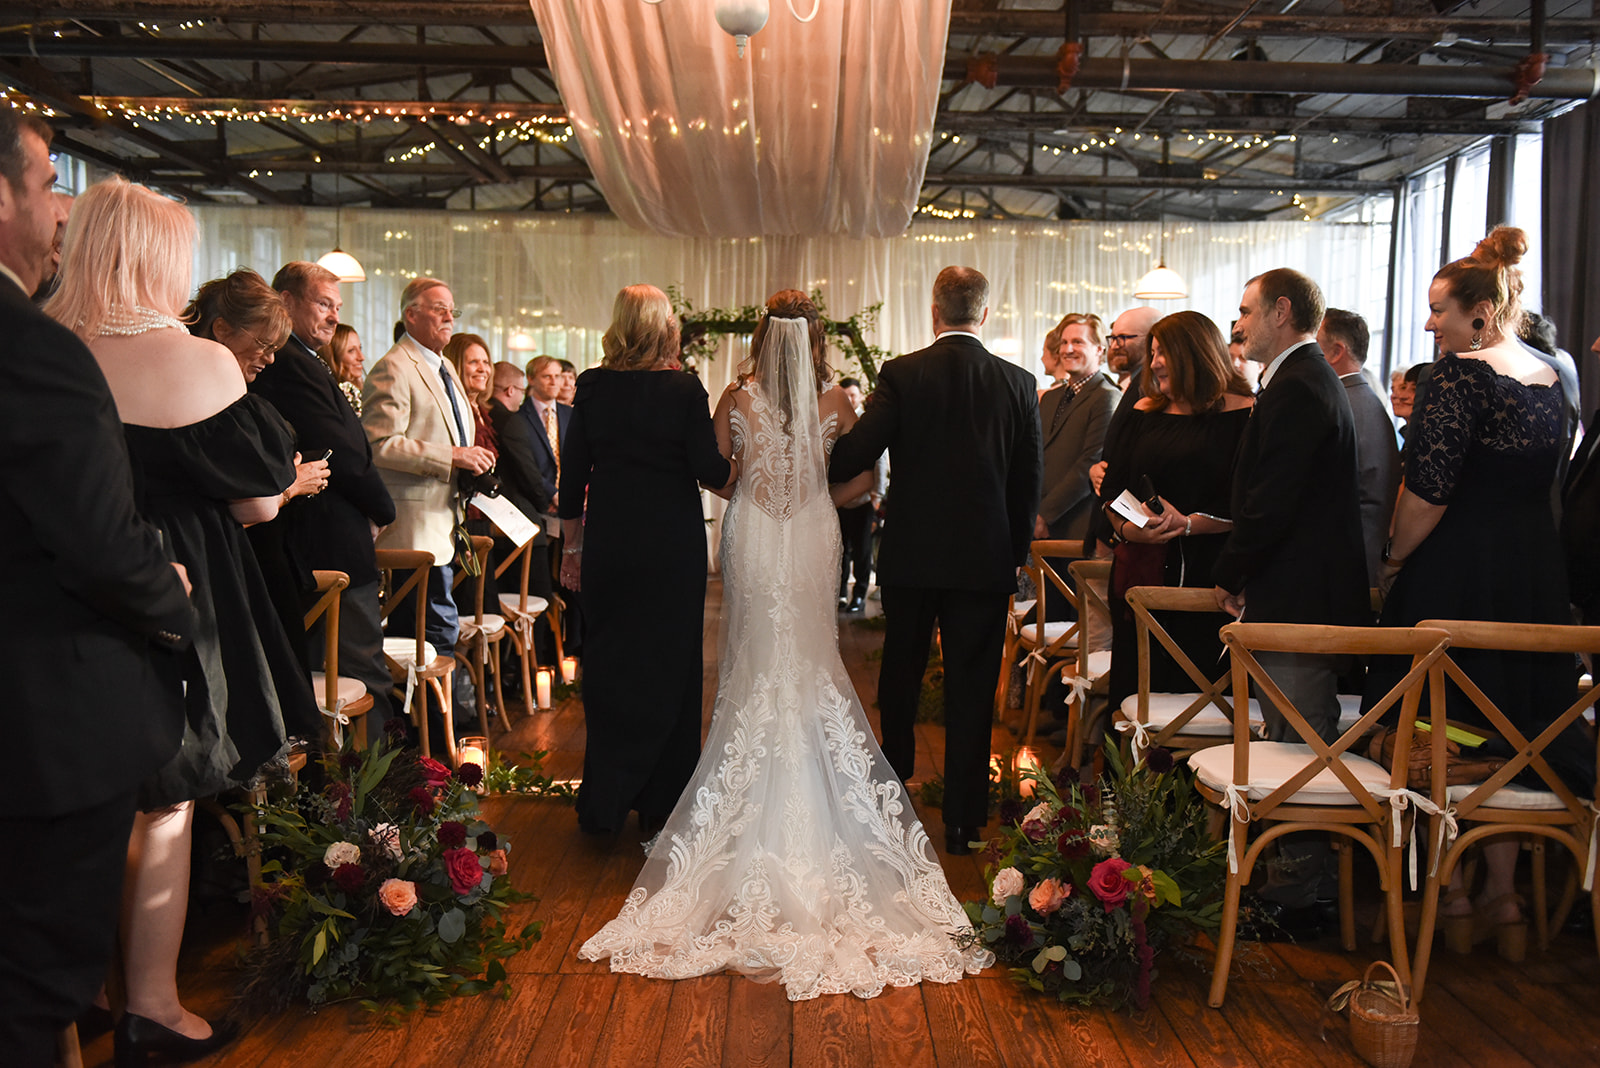 The back view of a bride walking down the aisle in a lace dress, guests on either side seated on folding chairs, and a floral-lined aisle leading to a draped fabric backdrop.